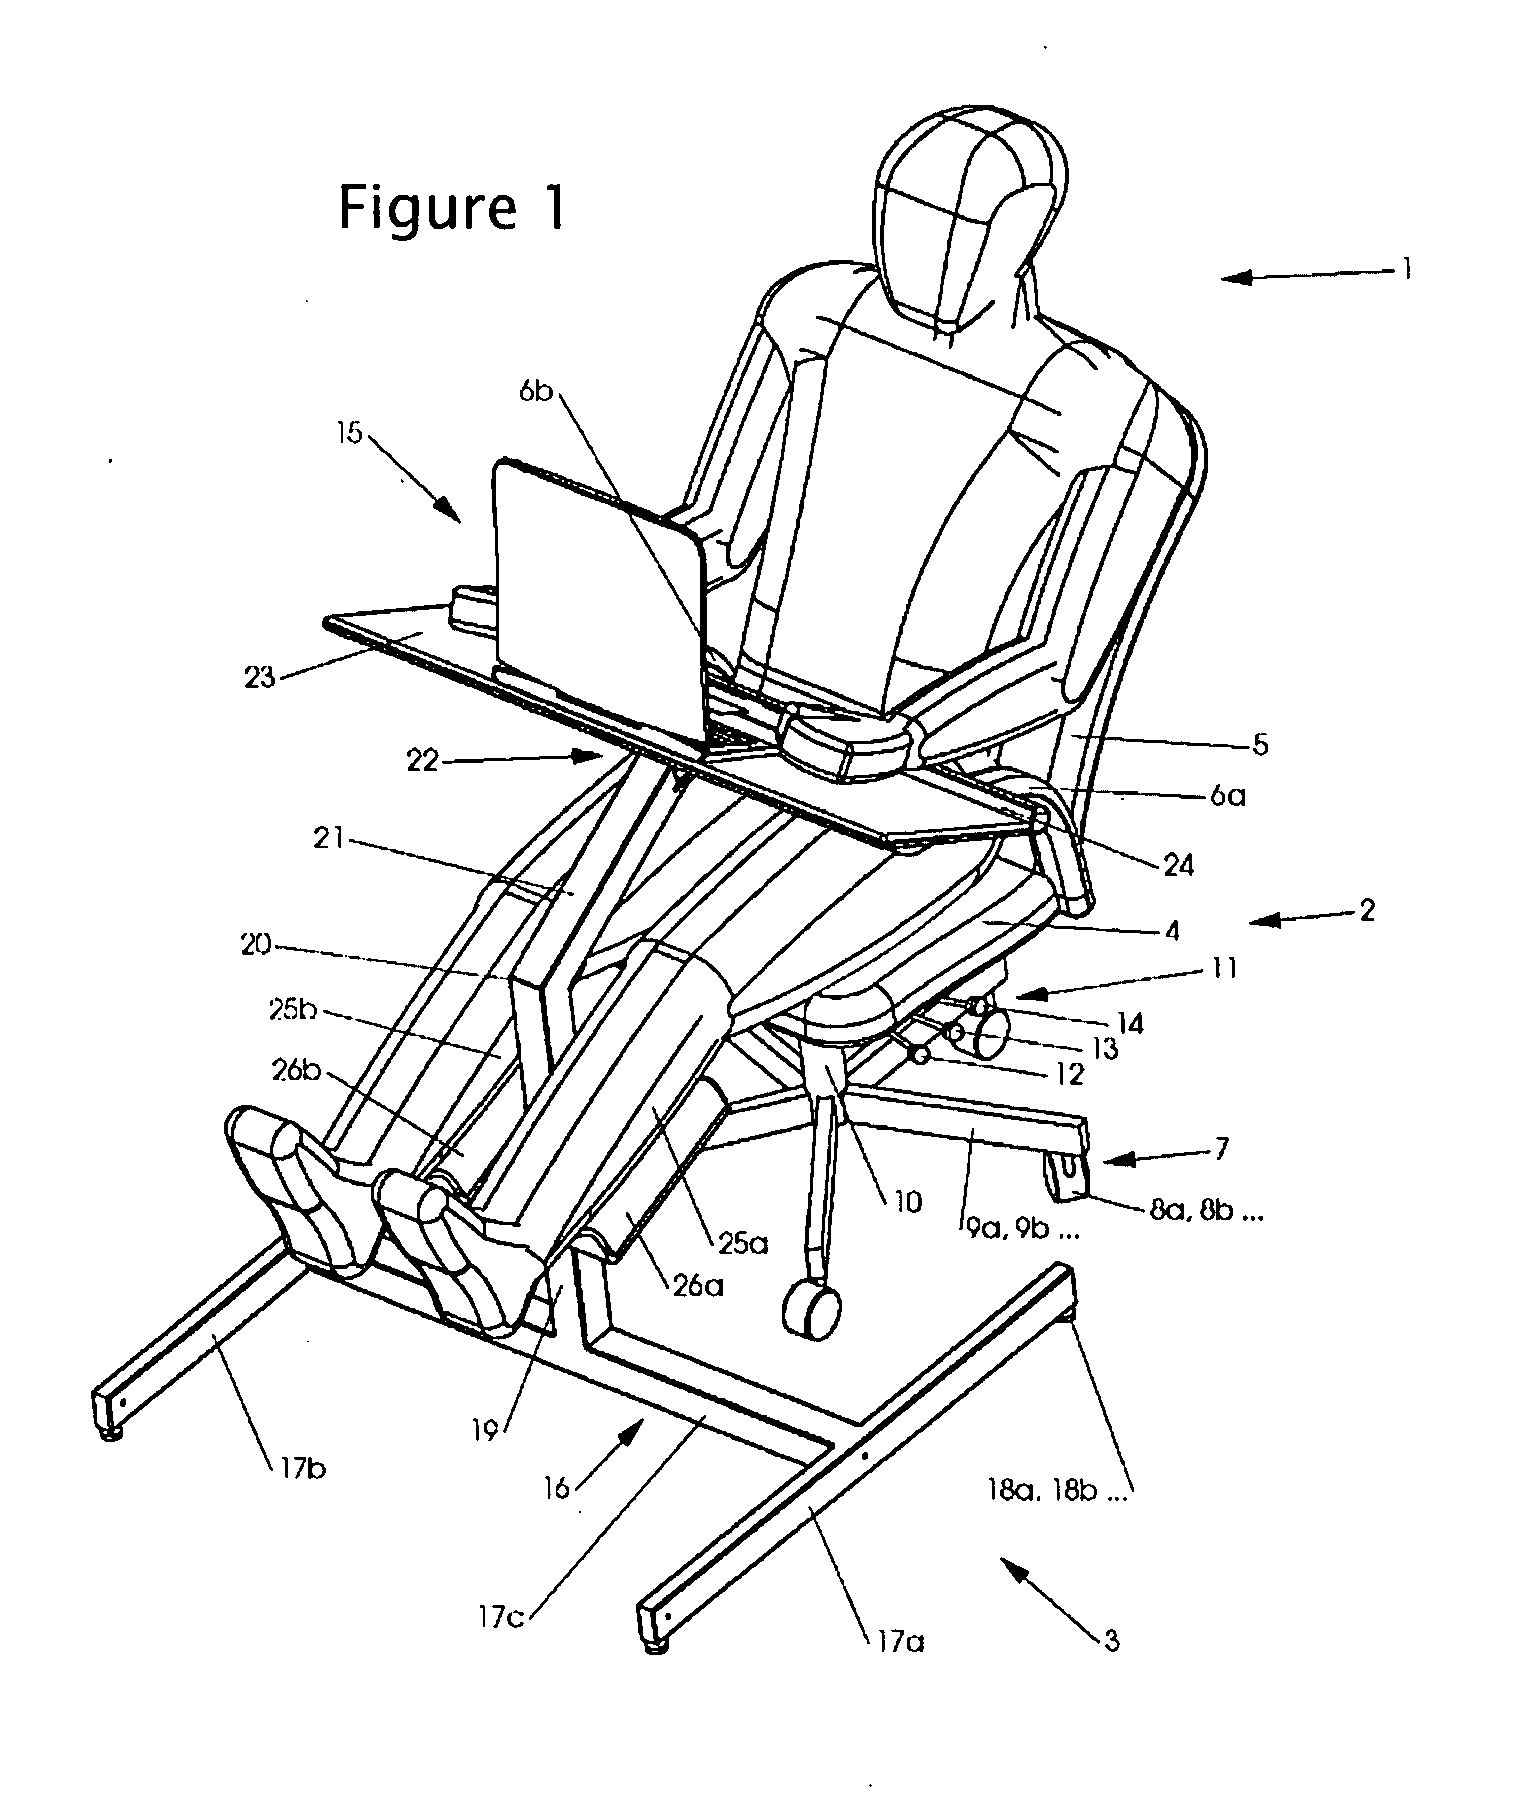 Workstation module for a reclinable office chair